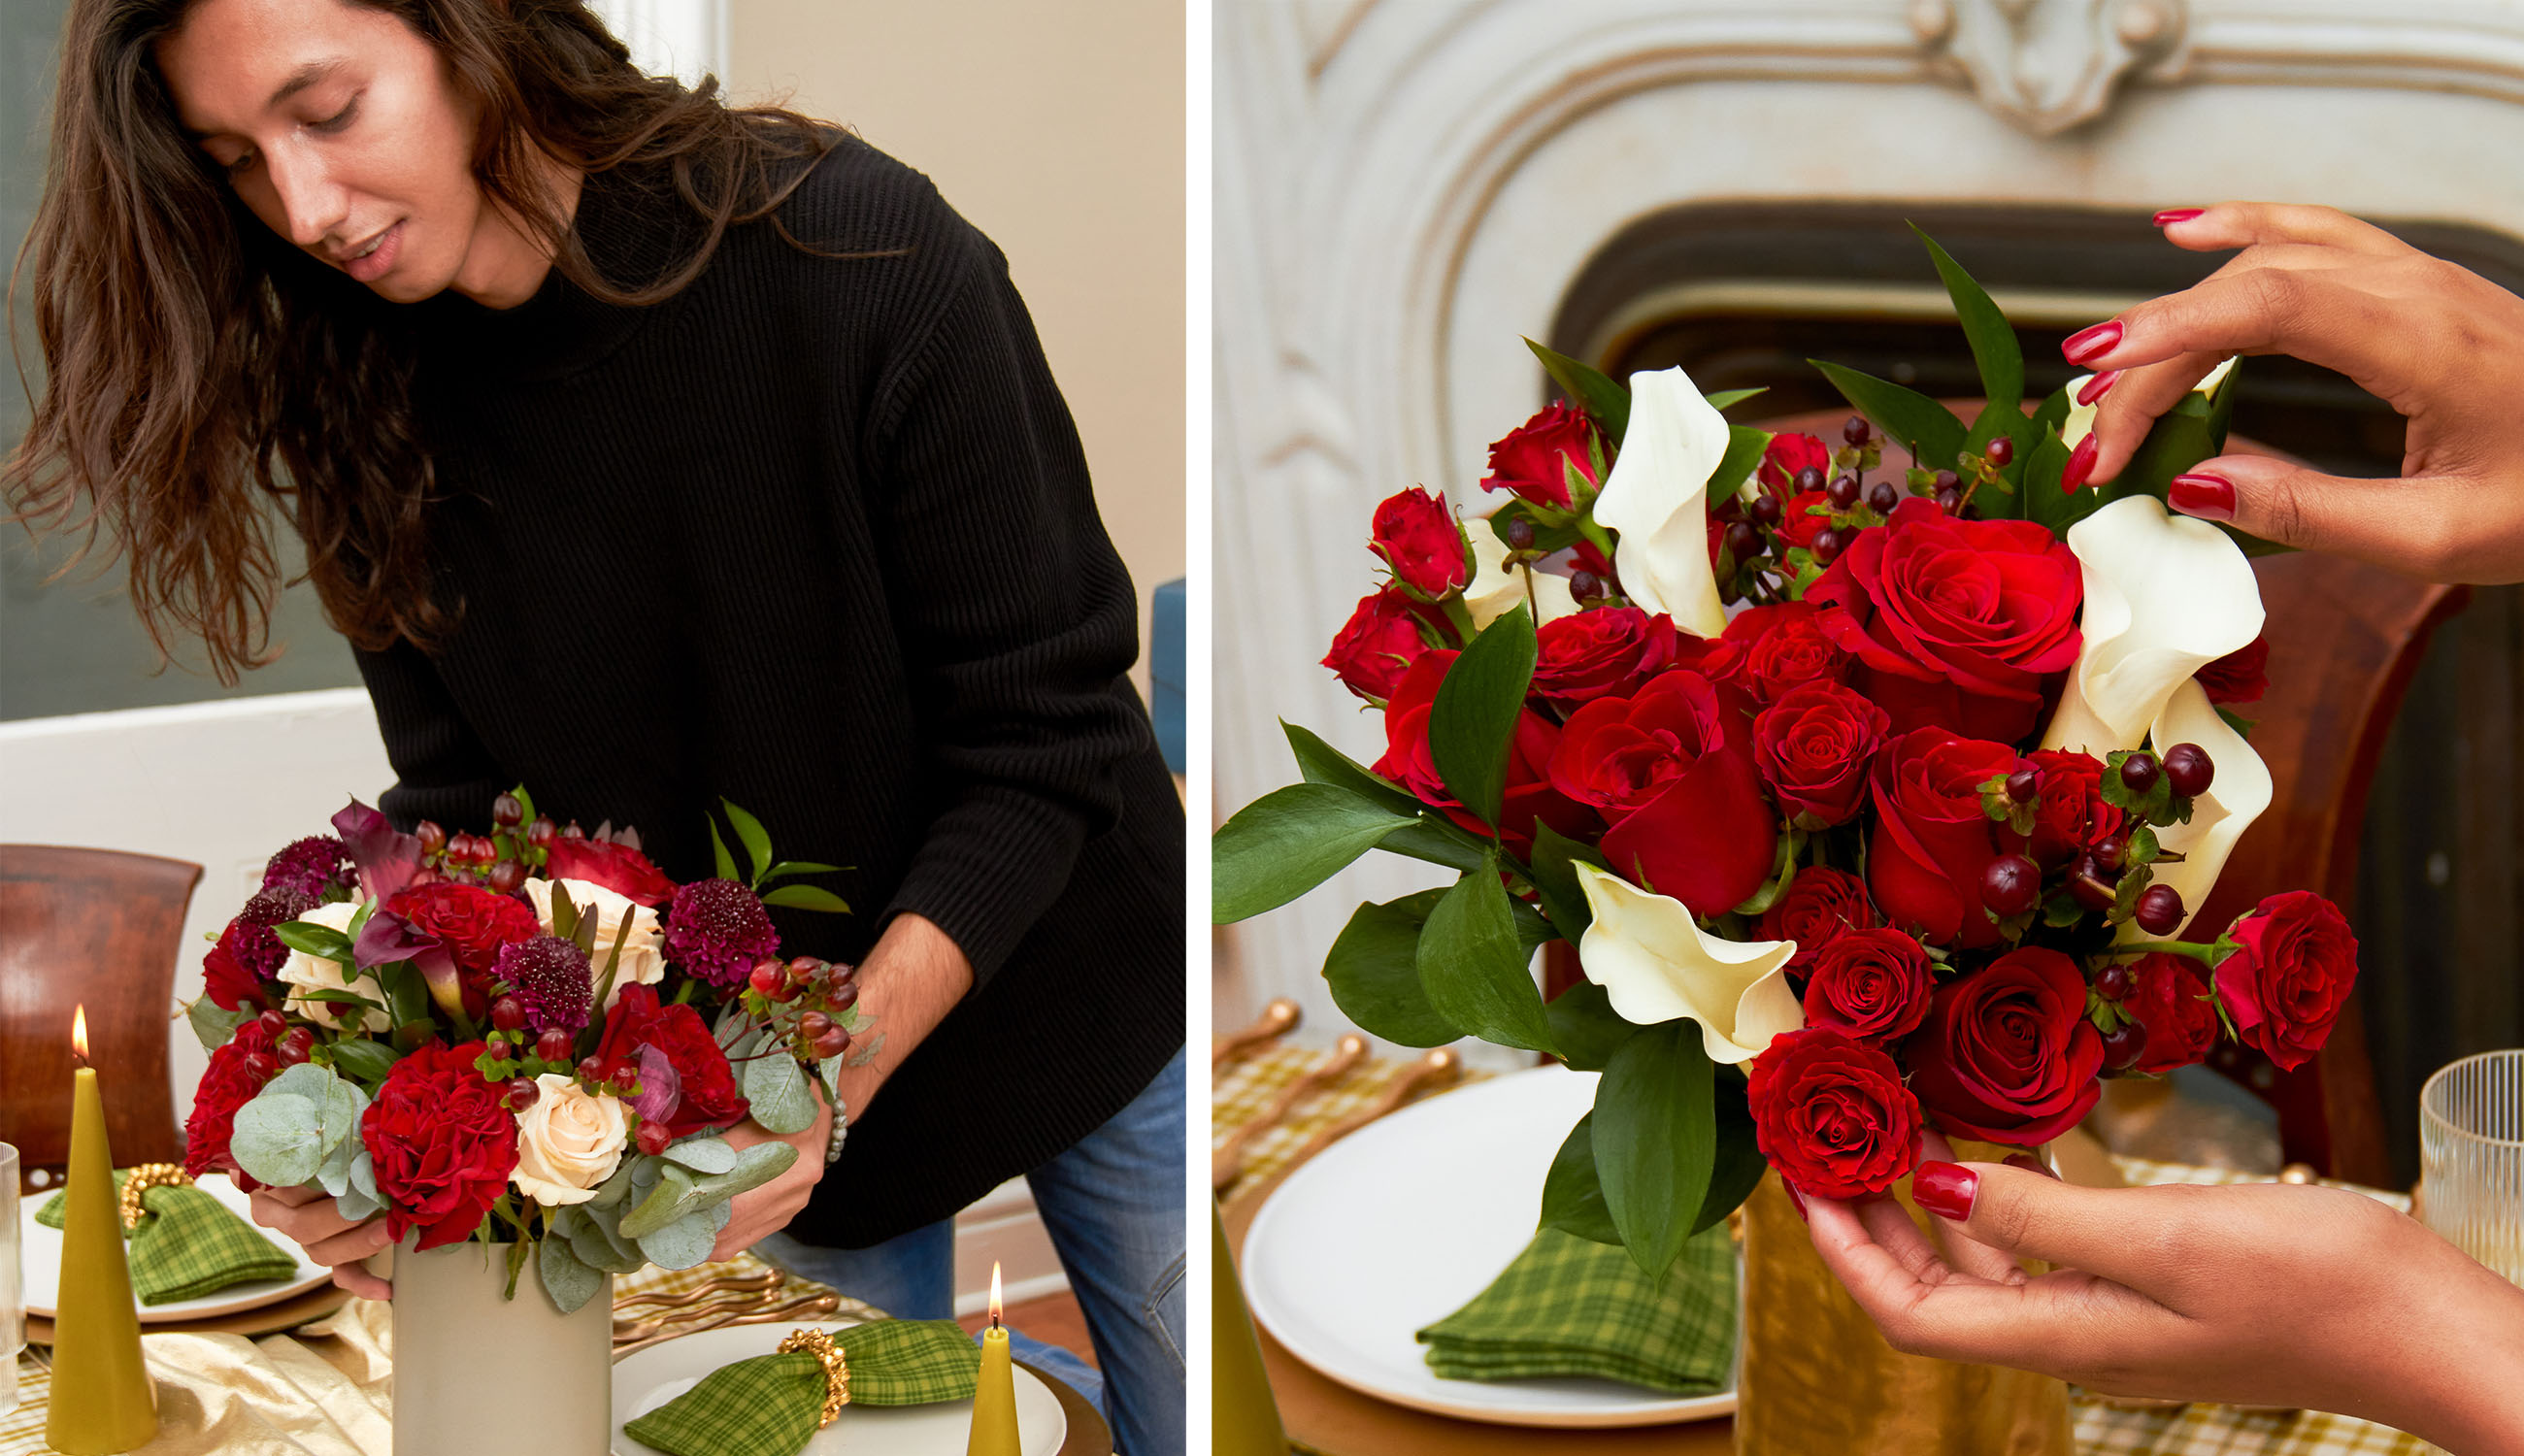 Justin from UrbanStems setting the table with holiday flowers